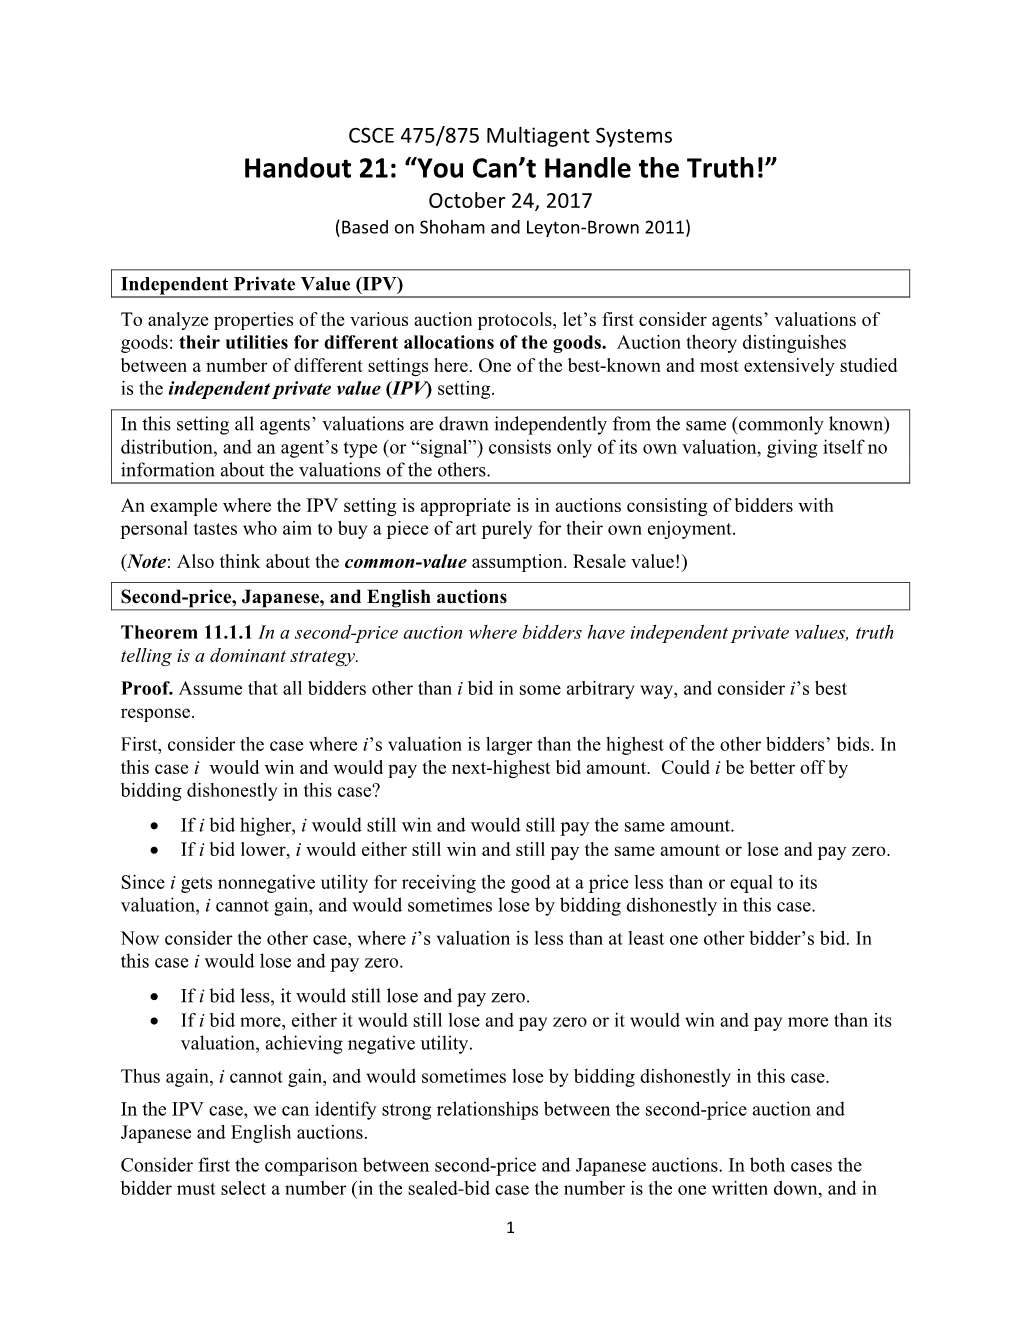 Handout 21: “You Can't Handle the Truth!”